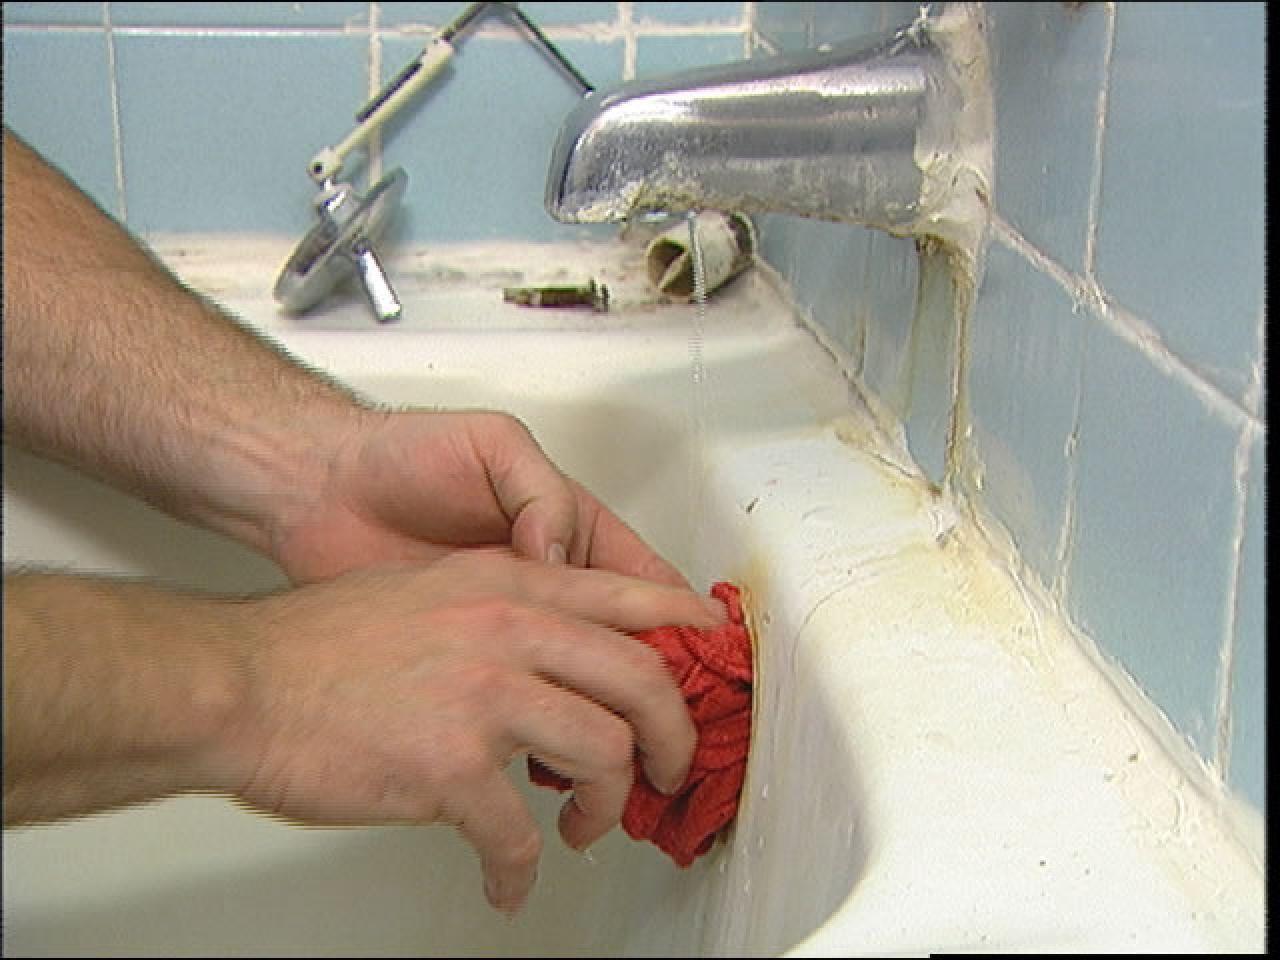 Unclog A Bathtub Using The Trip Lever, How To Unclog Bathtub Drain Full Of Hair At Home